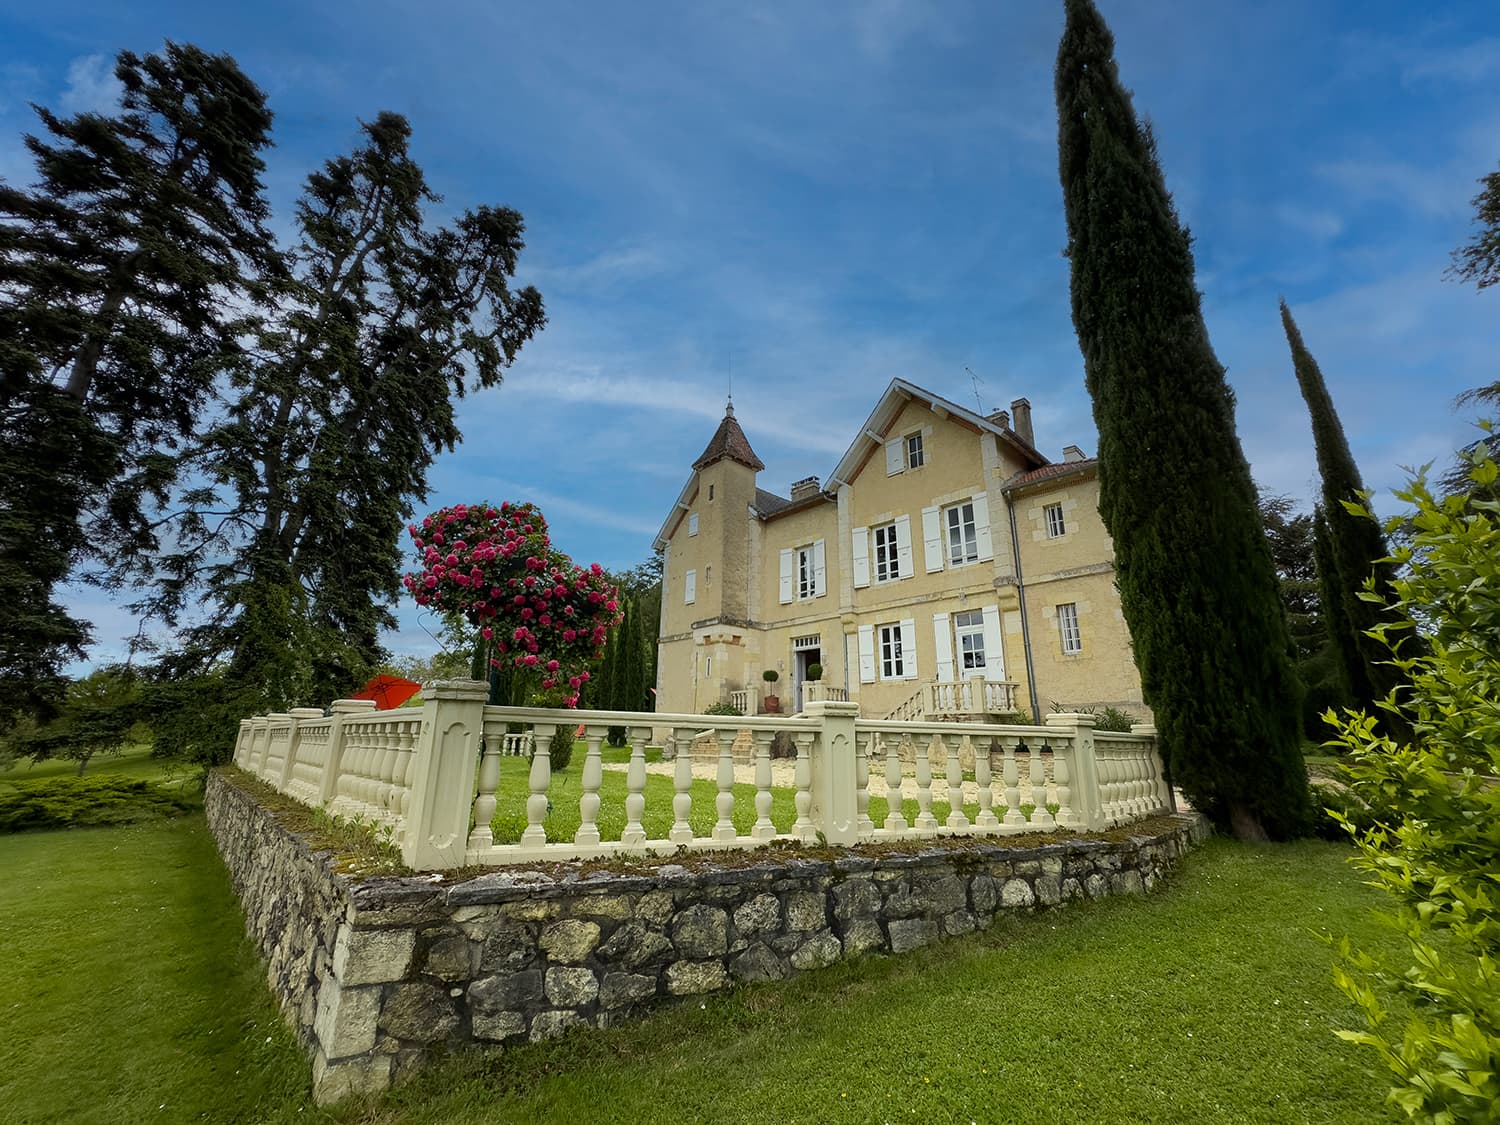 Vacation château in the Gers